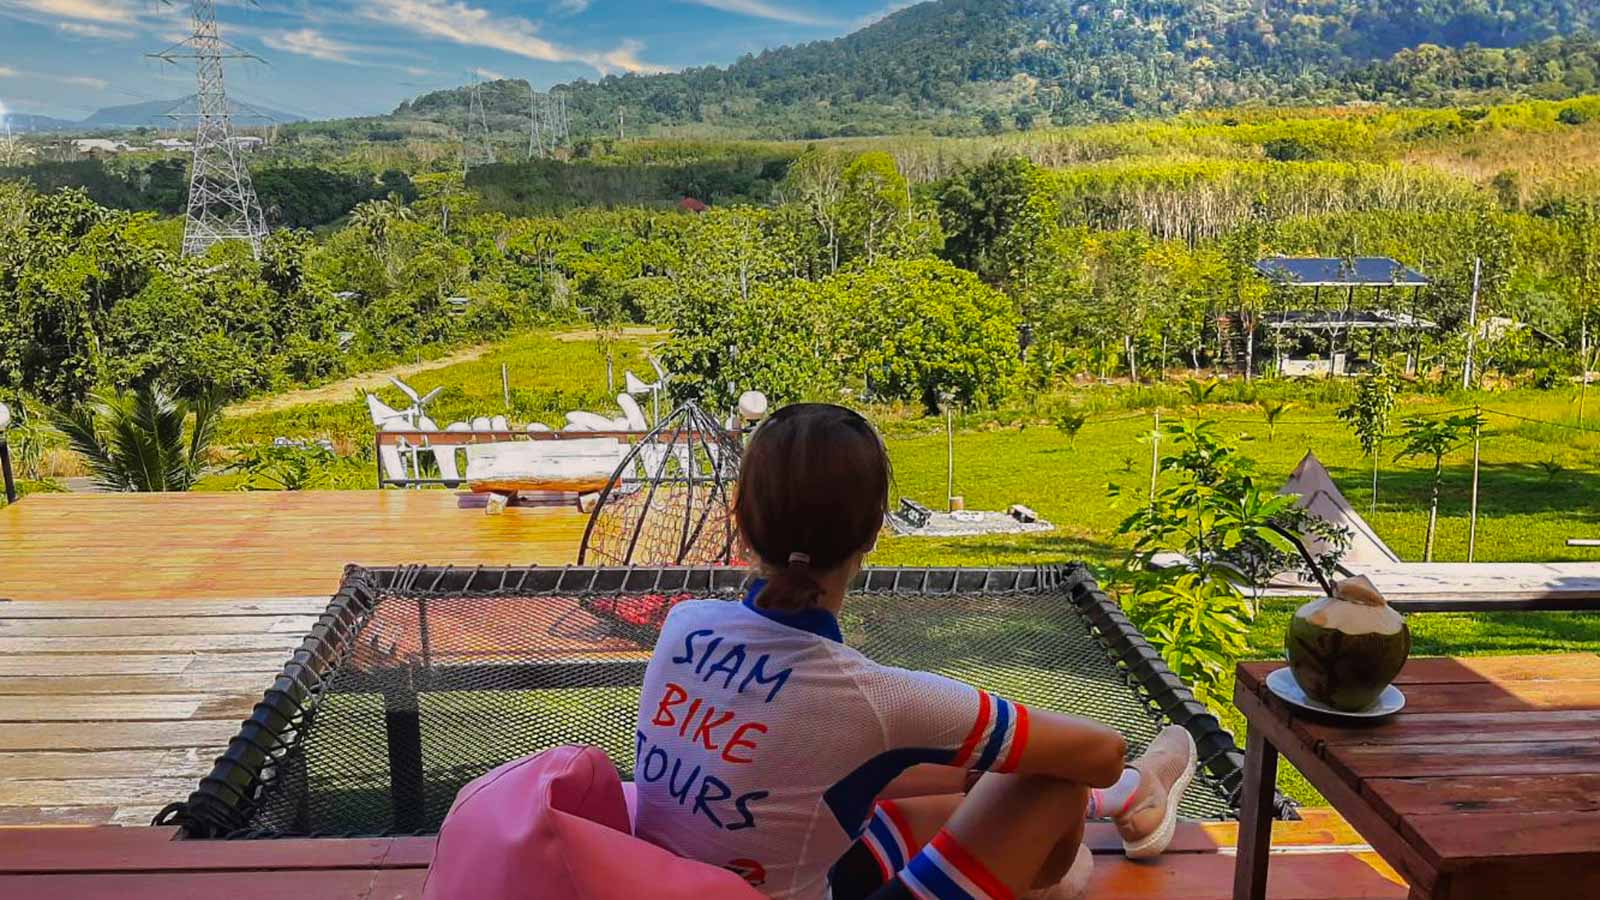 Cyclist relaxing and enjoying view in Thailand